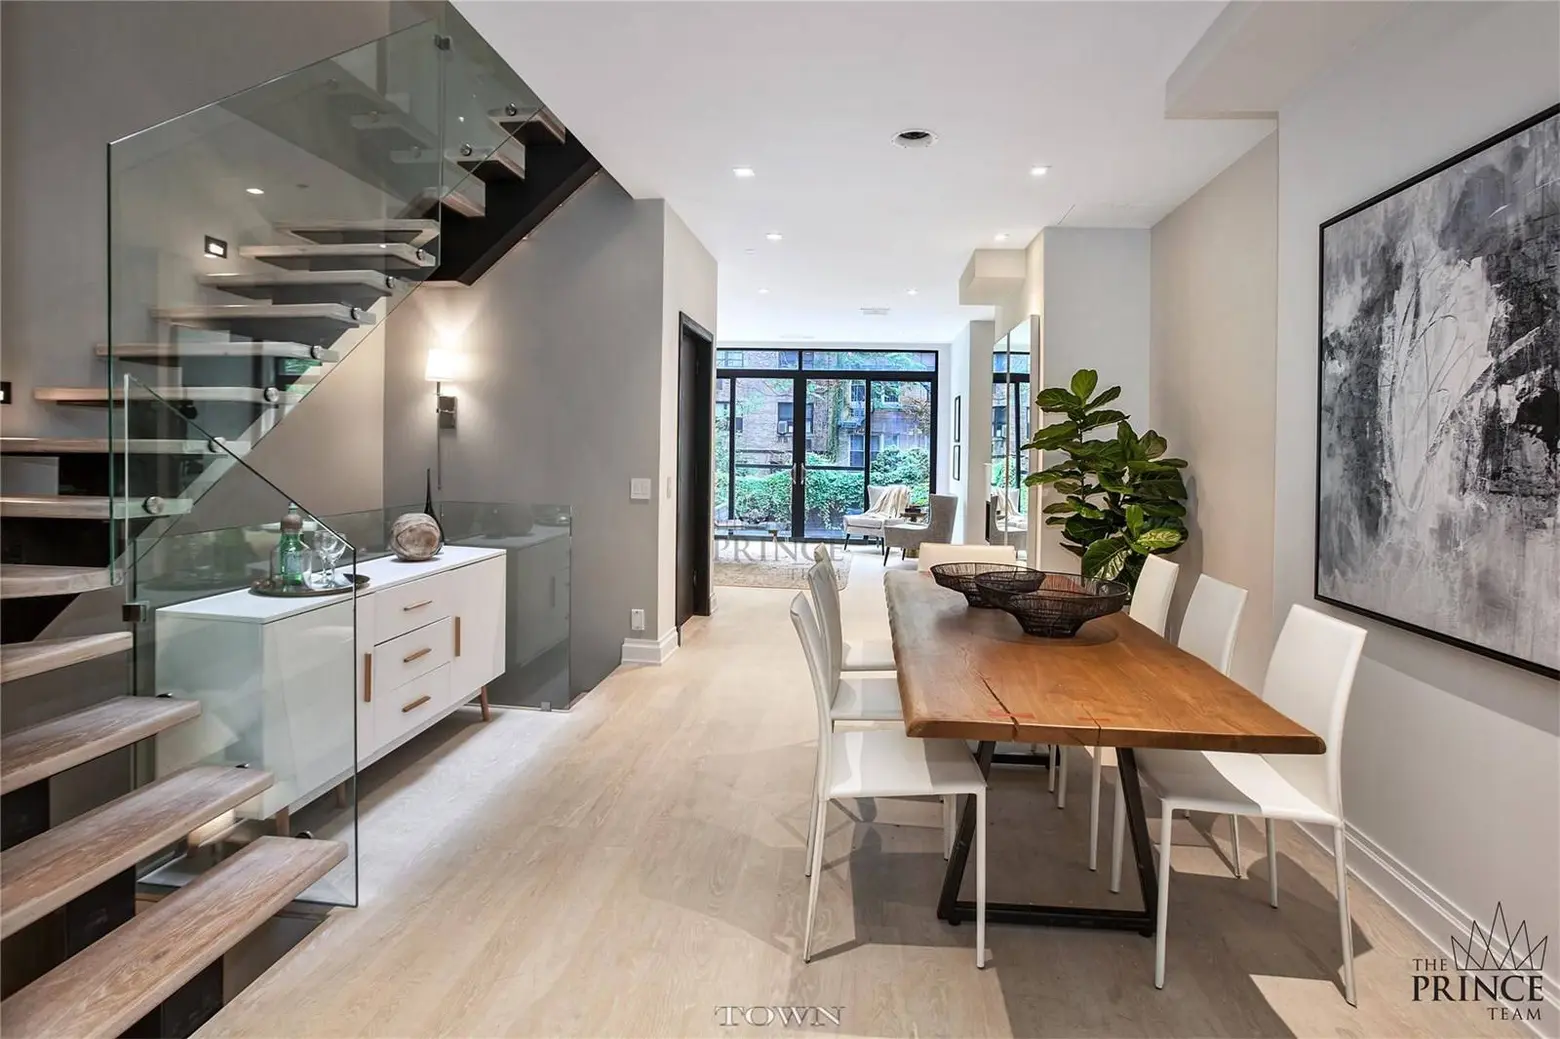 Work for Google? Get a $1M discount on this $13M 7-story Chelsea townhouse